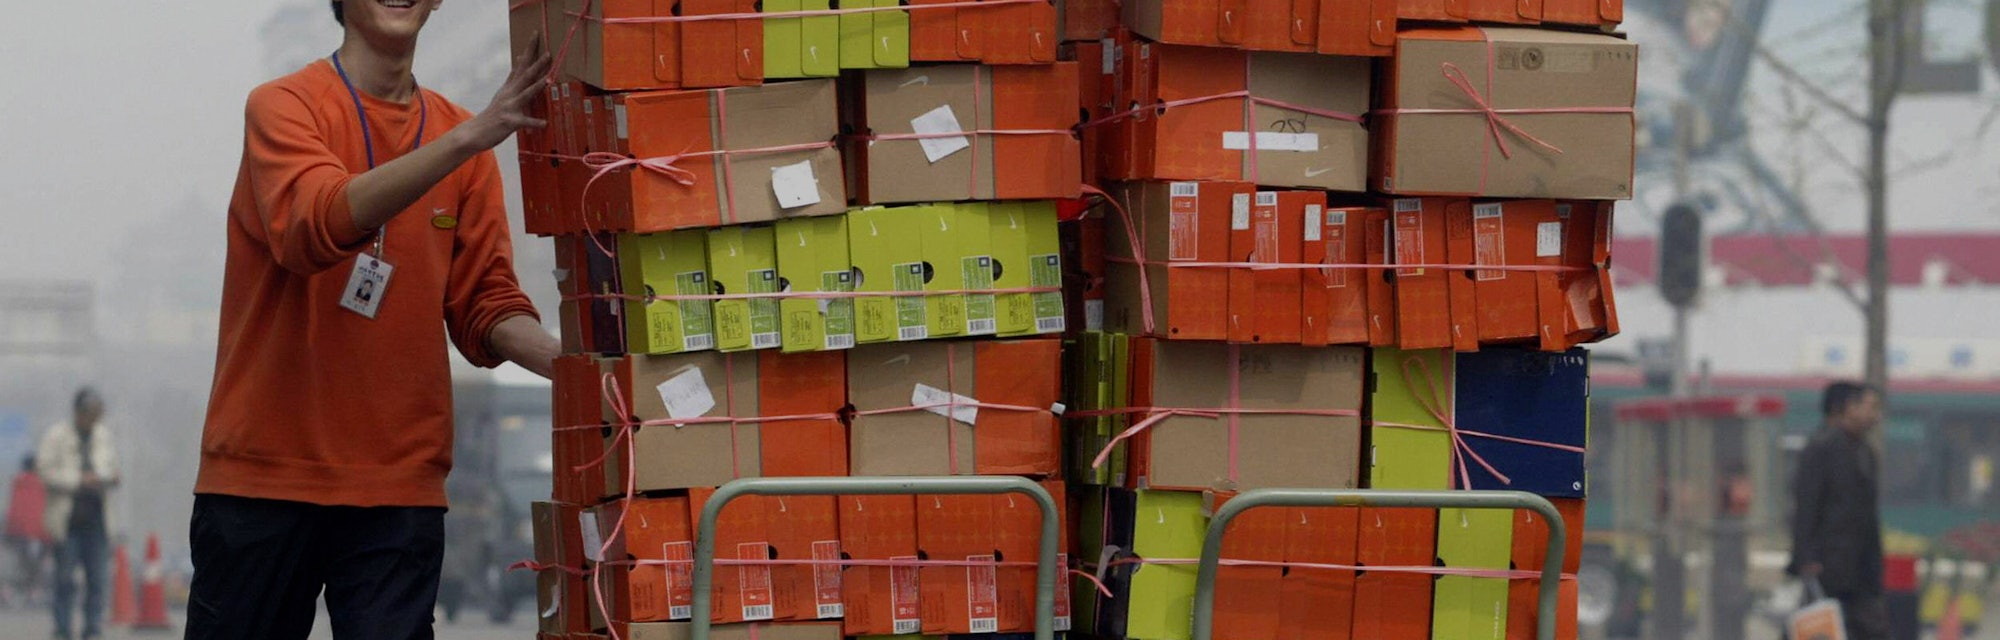 BEIJING, CHINA:  A store employee pushes carts loaded with boxes of US brand Nike sports shoes down ...